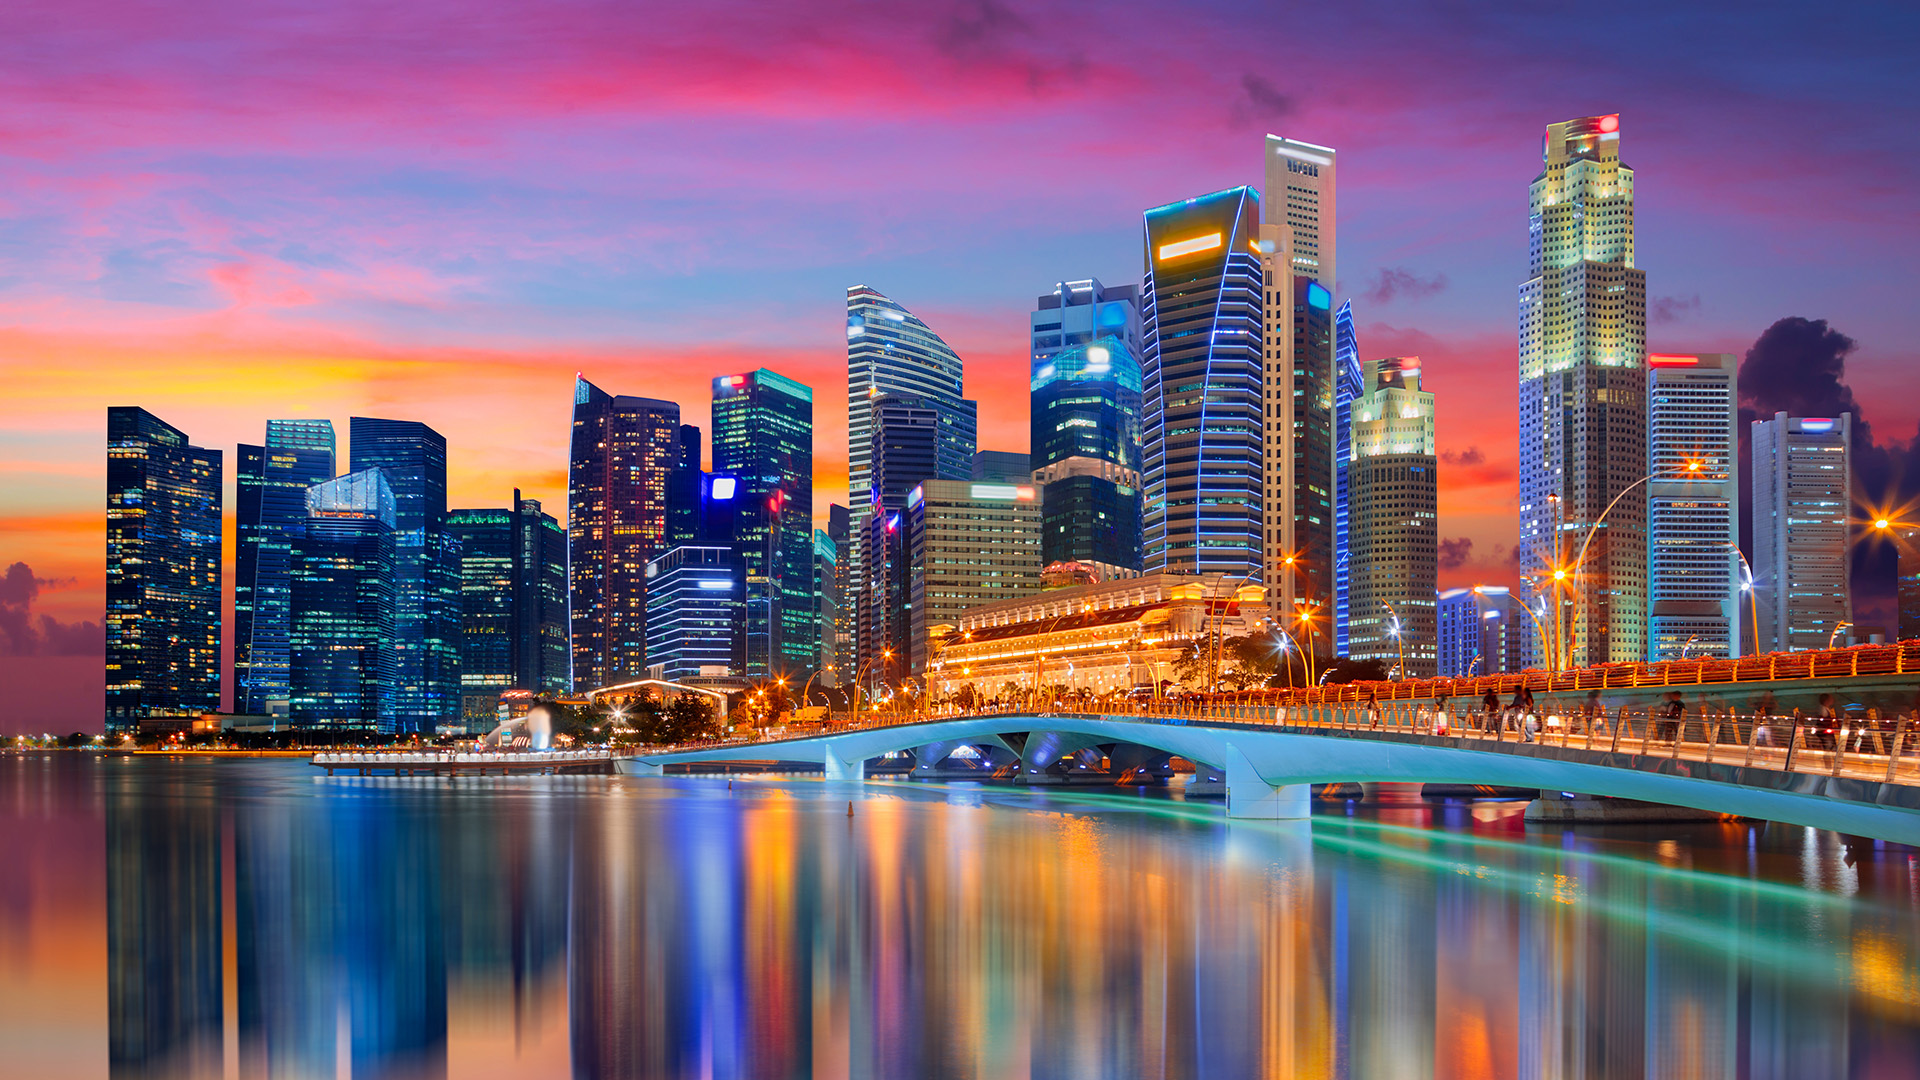 Statutory Developments in Singapore’s Foreign Direct Investment Regime – commencement of Significant Investments Review Act and publication of initial list of designated entities